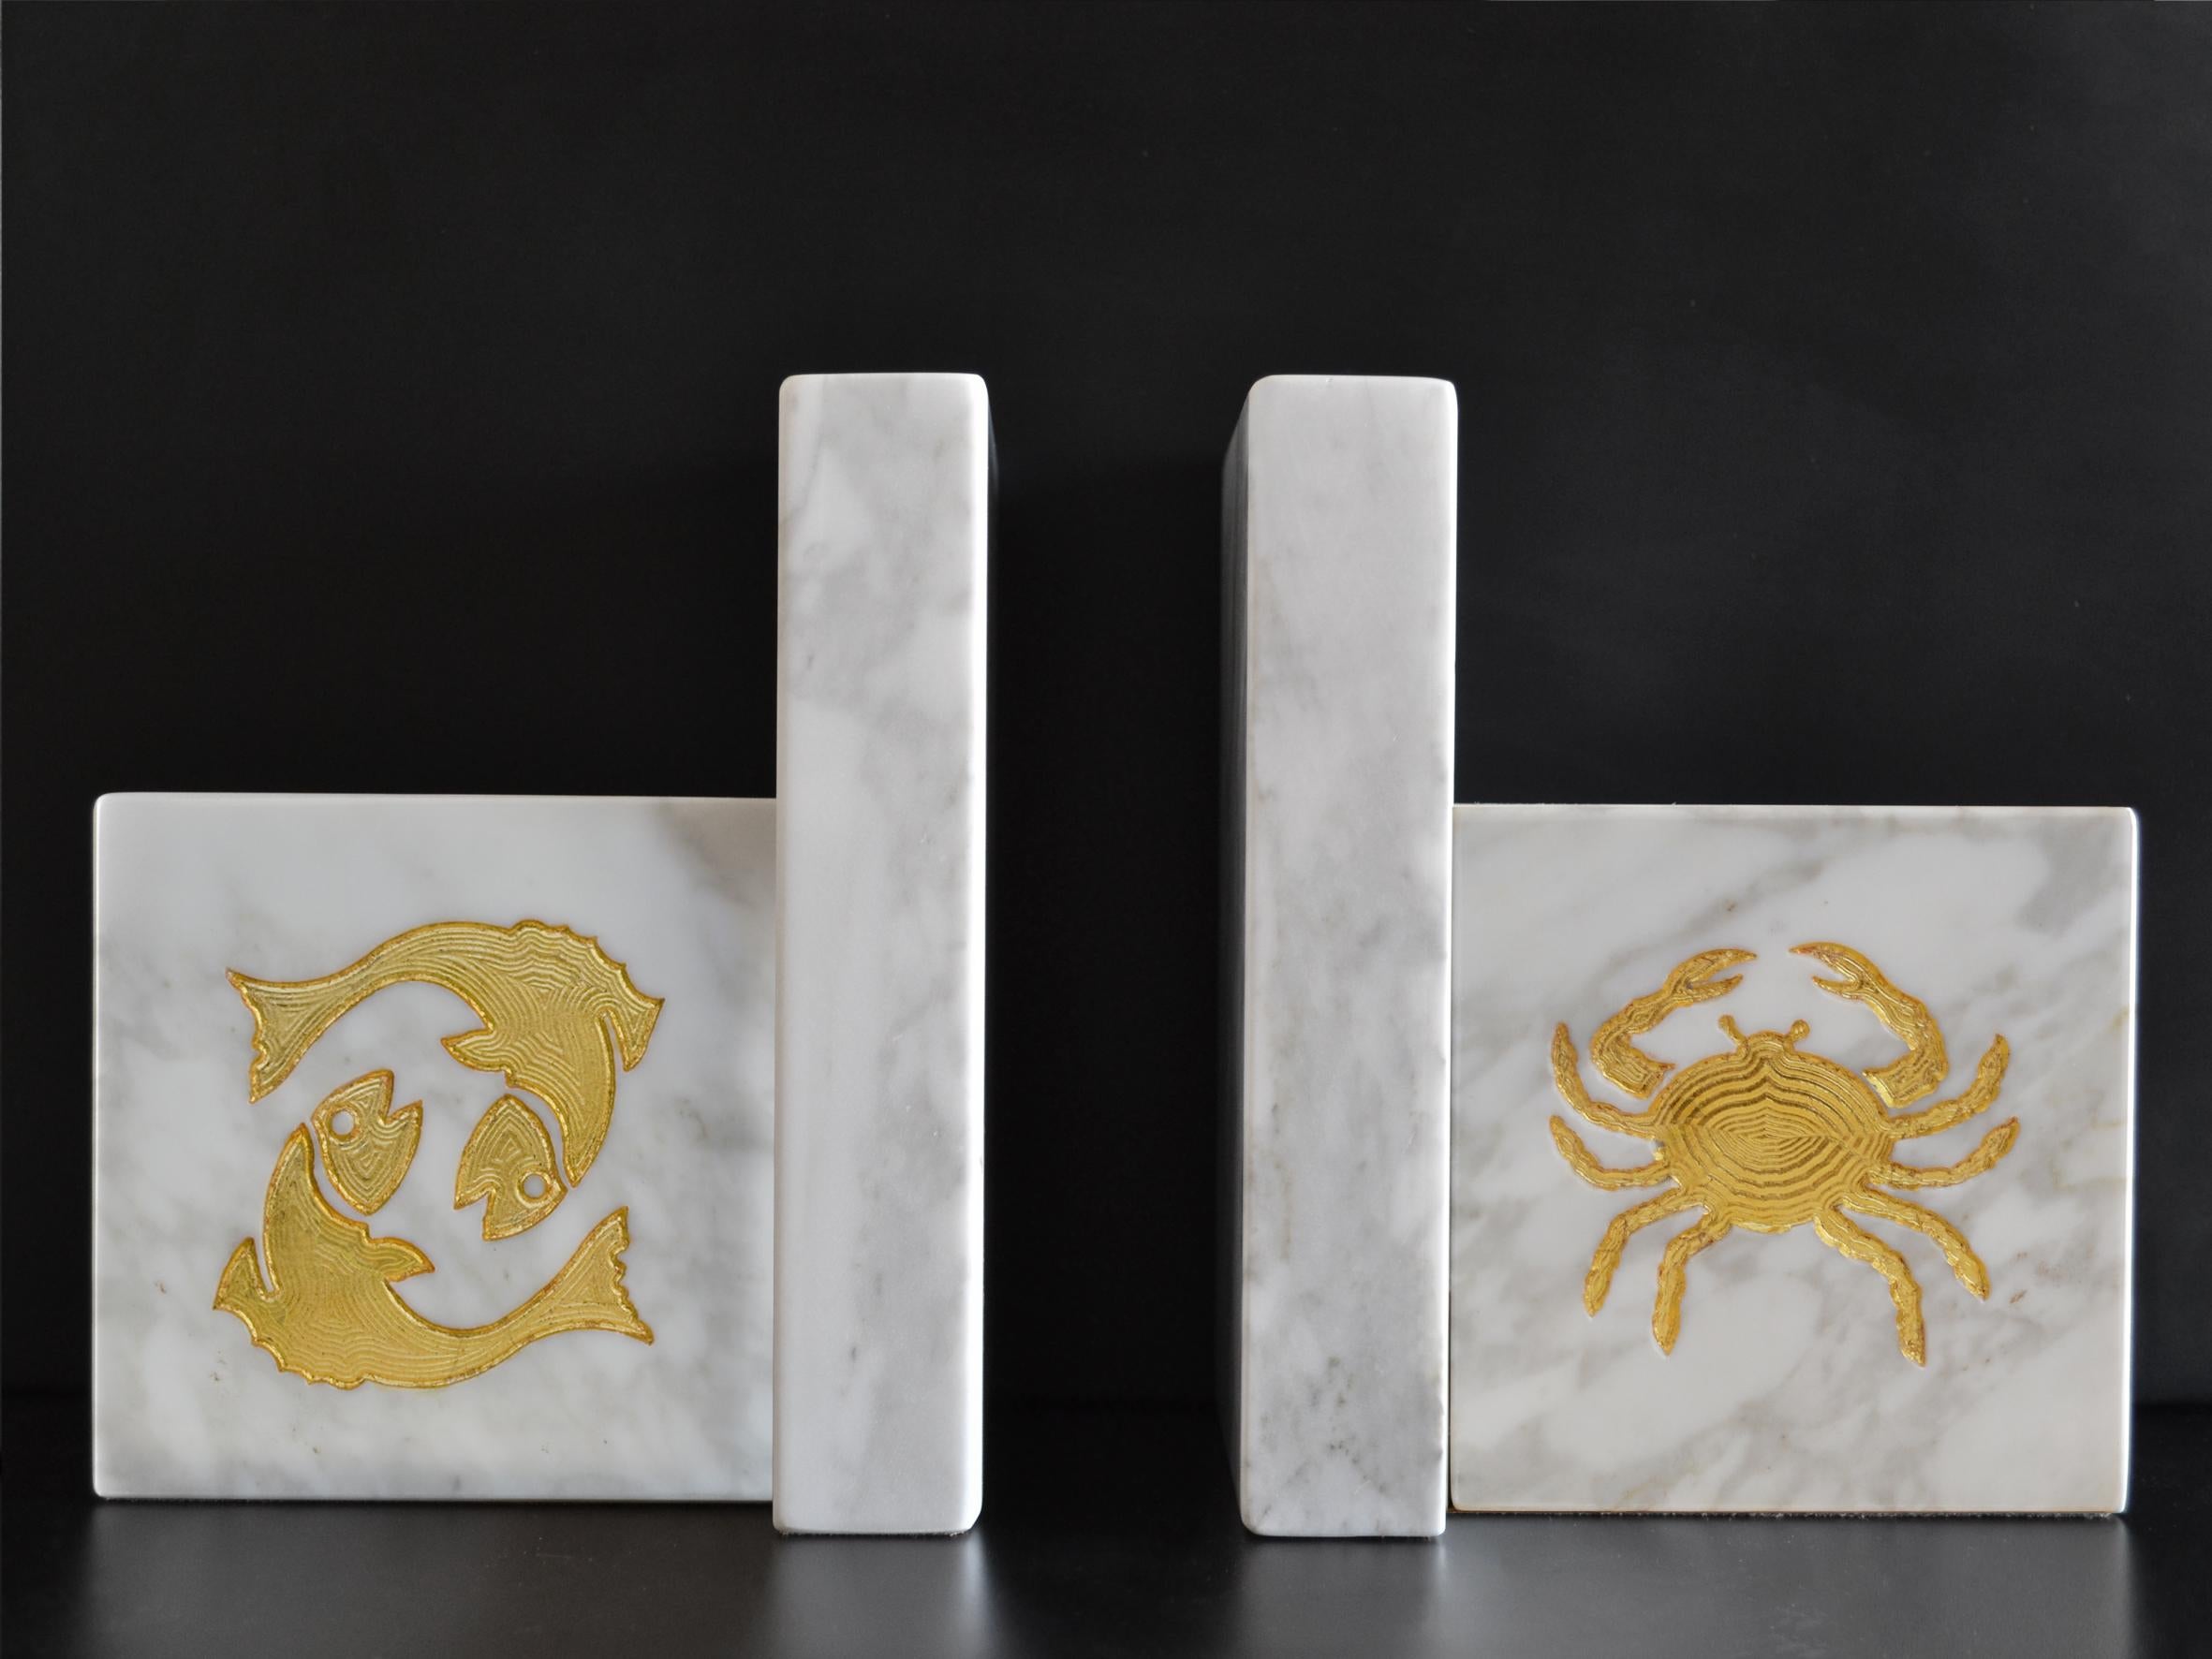 Italian Cupioli White Marble Bookends  gold leaf  Inlaid Zodiac  Handmade in Italy   For Sale